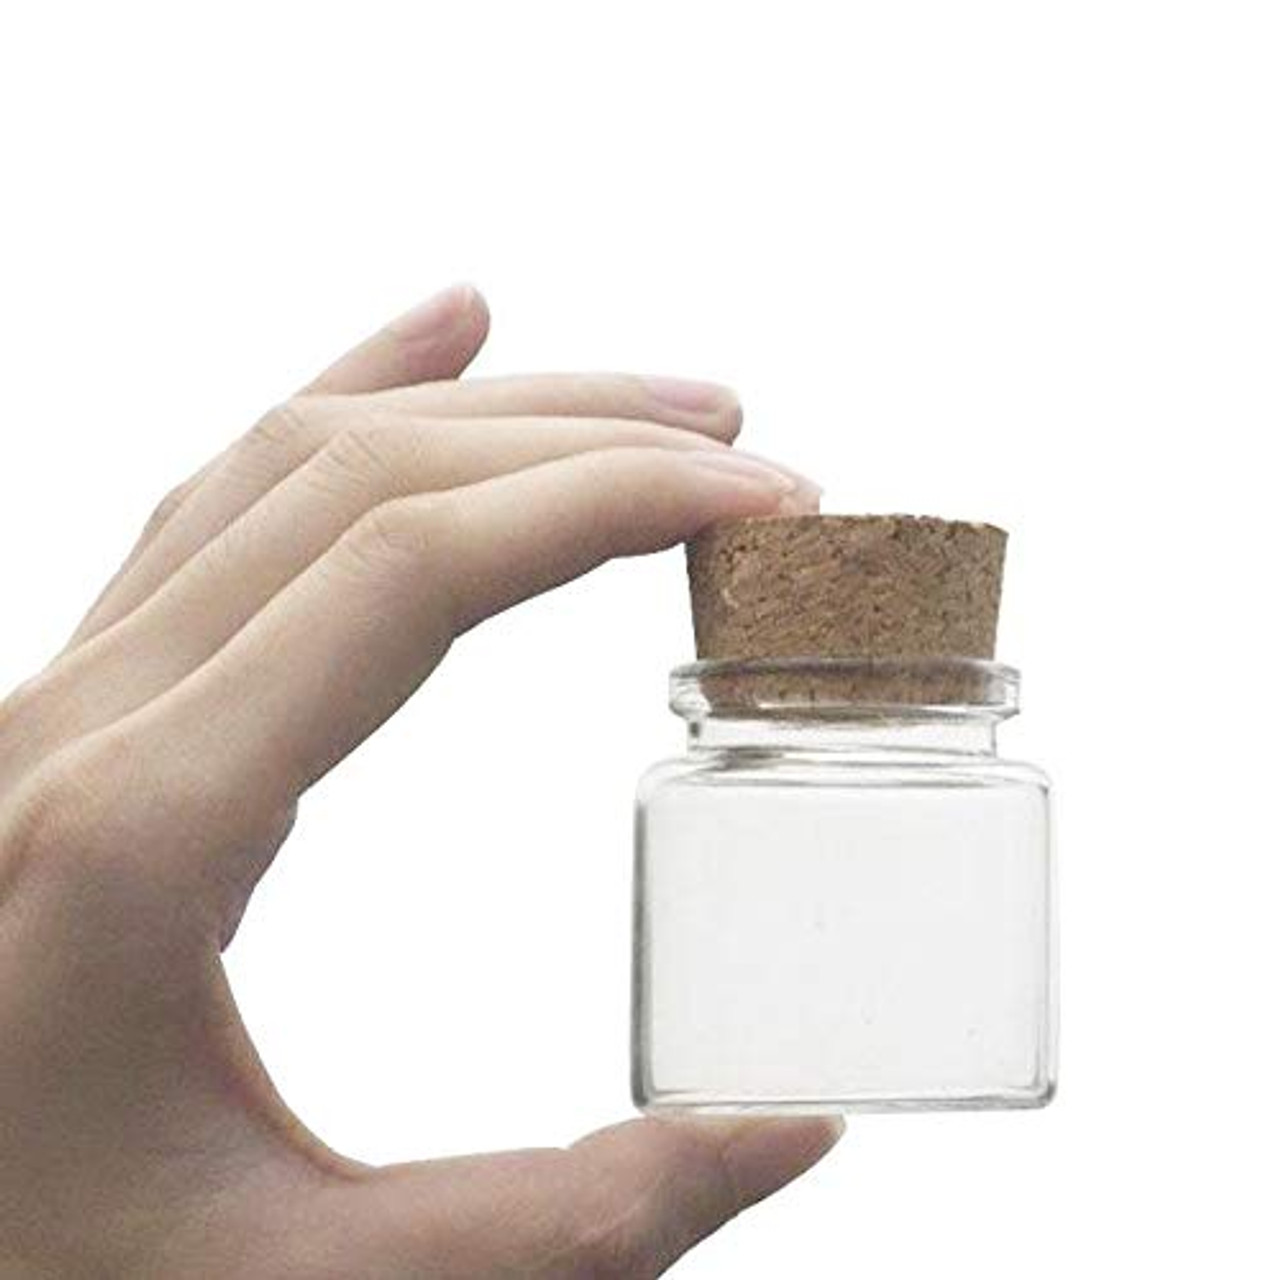 ELYSAID 5pcs of 50 ml Small Glass vials with Cork Tops Tiny